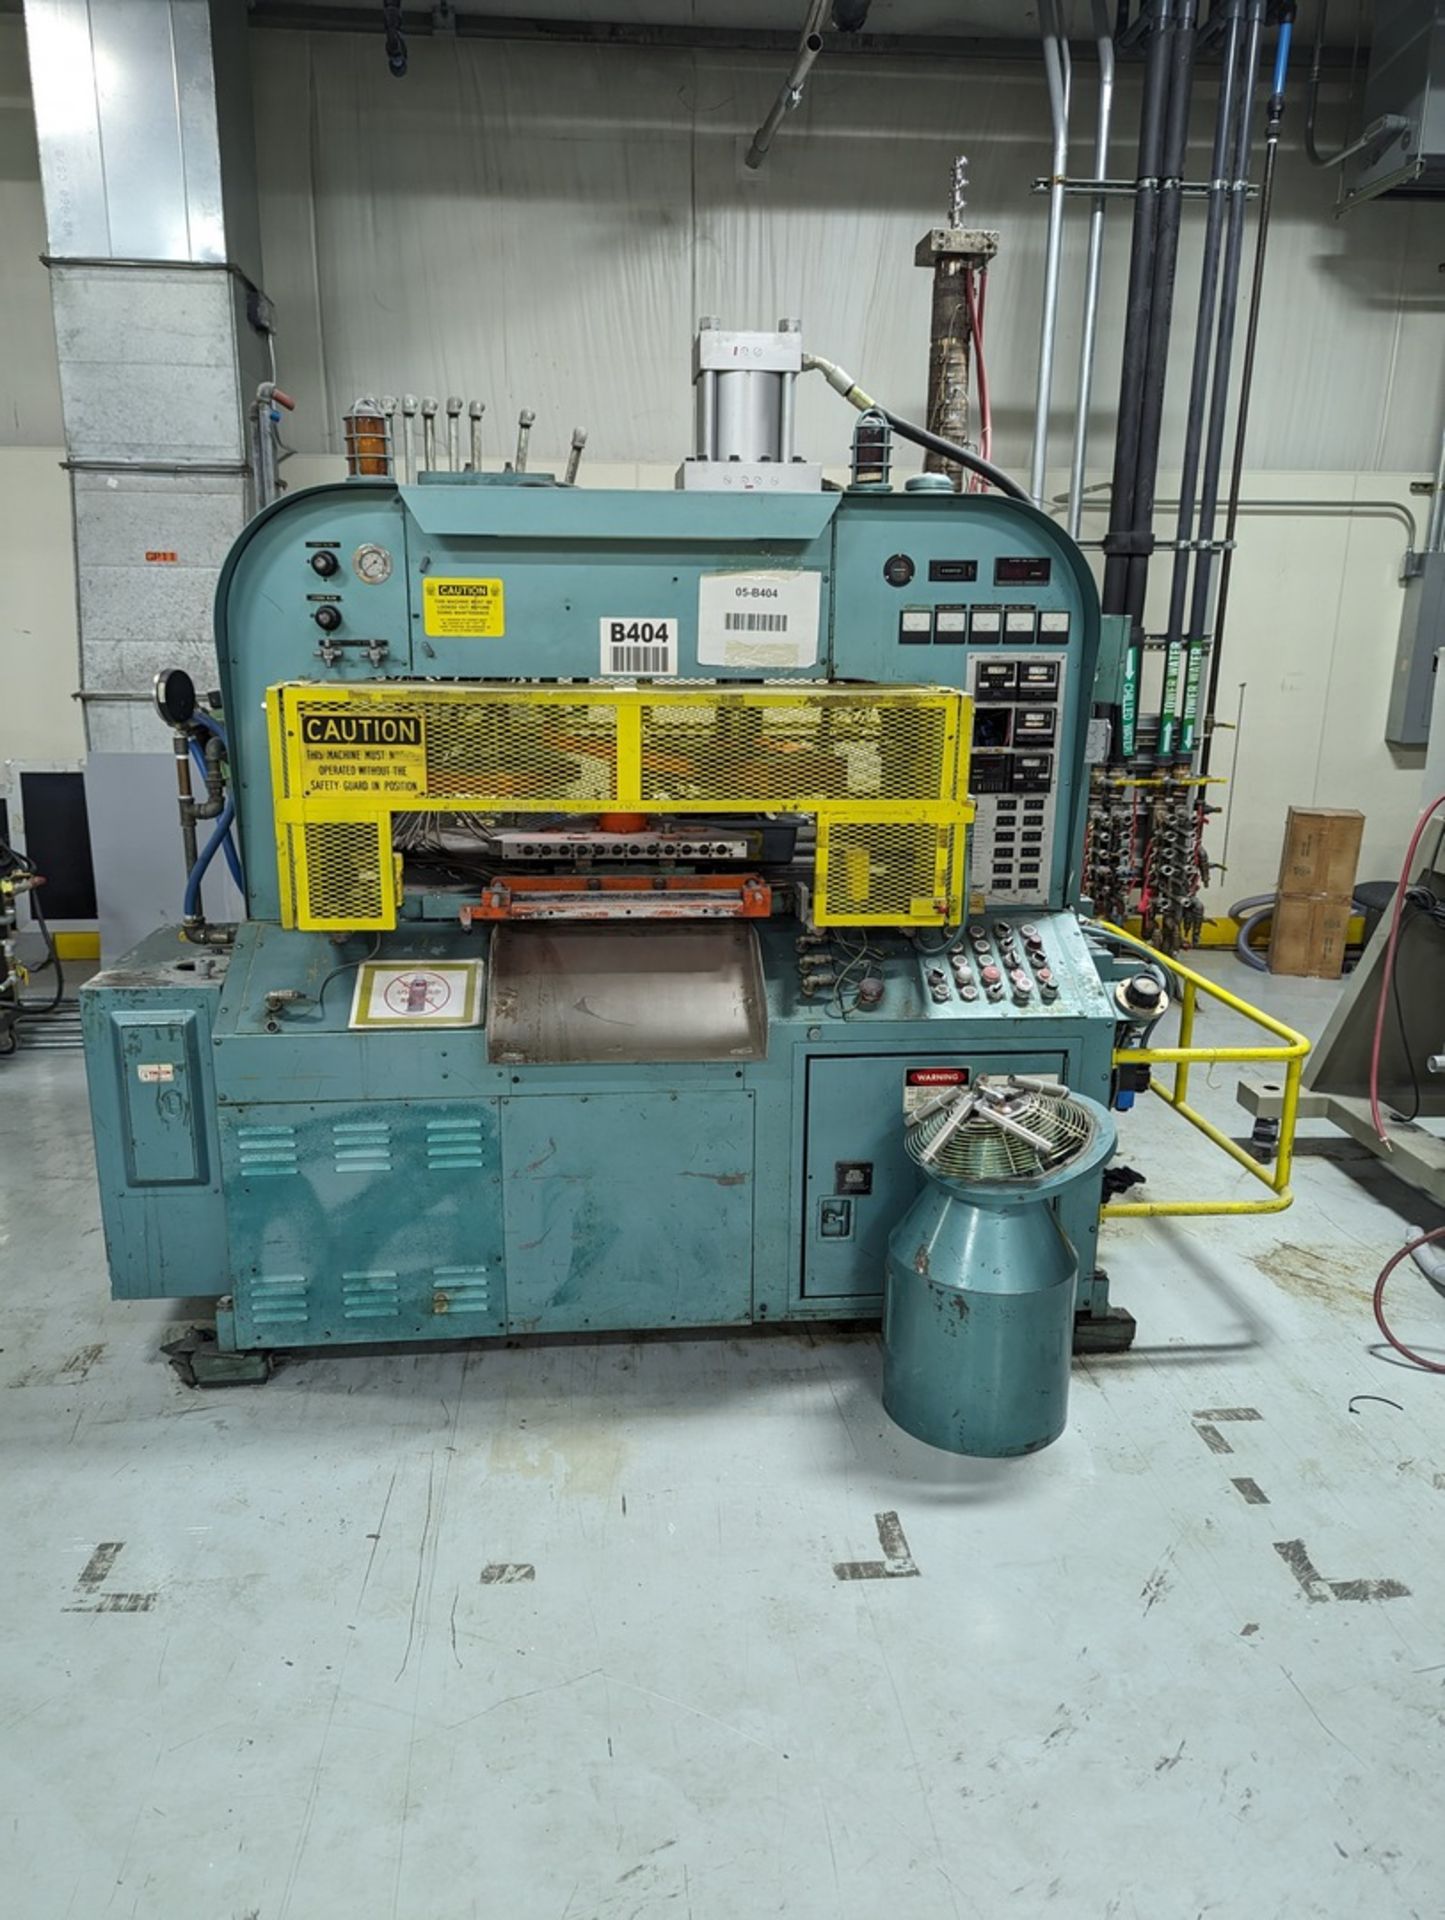 1989 Jomar 85 Injection Blow Molder - Image 3 of 6